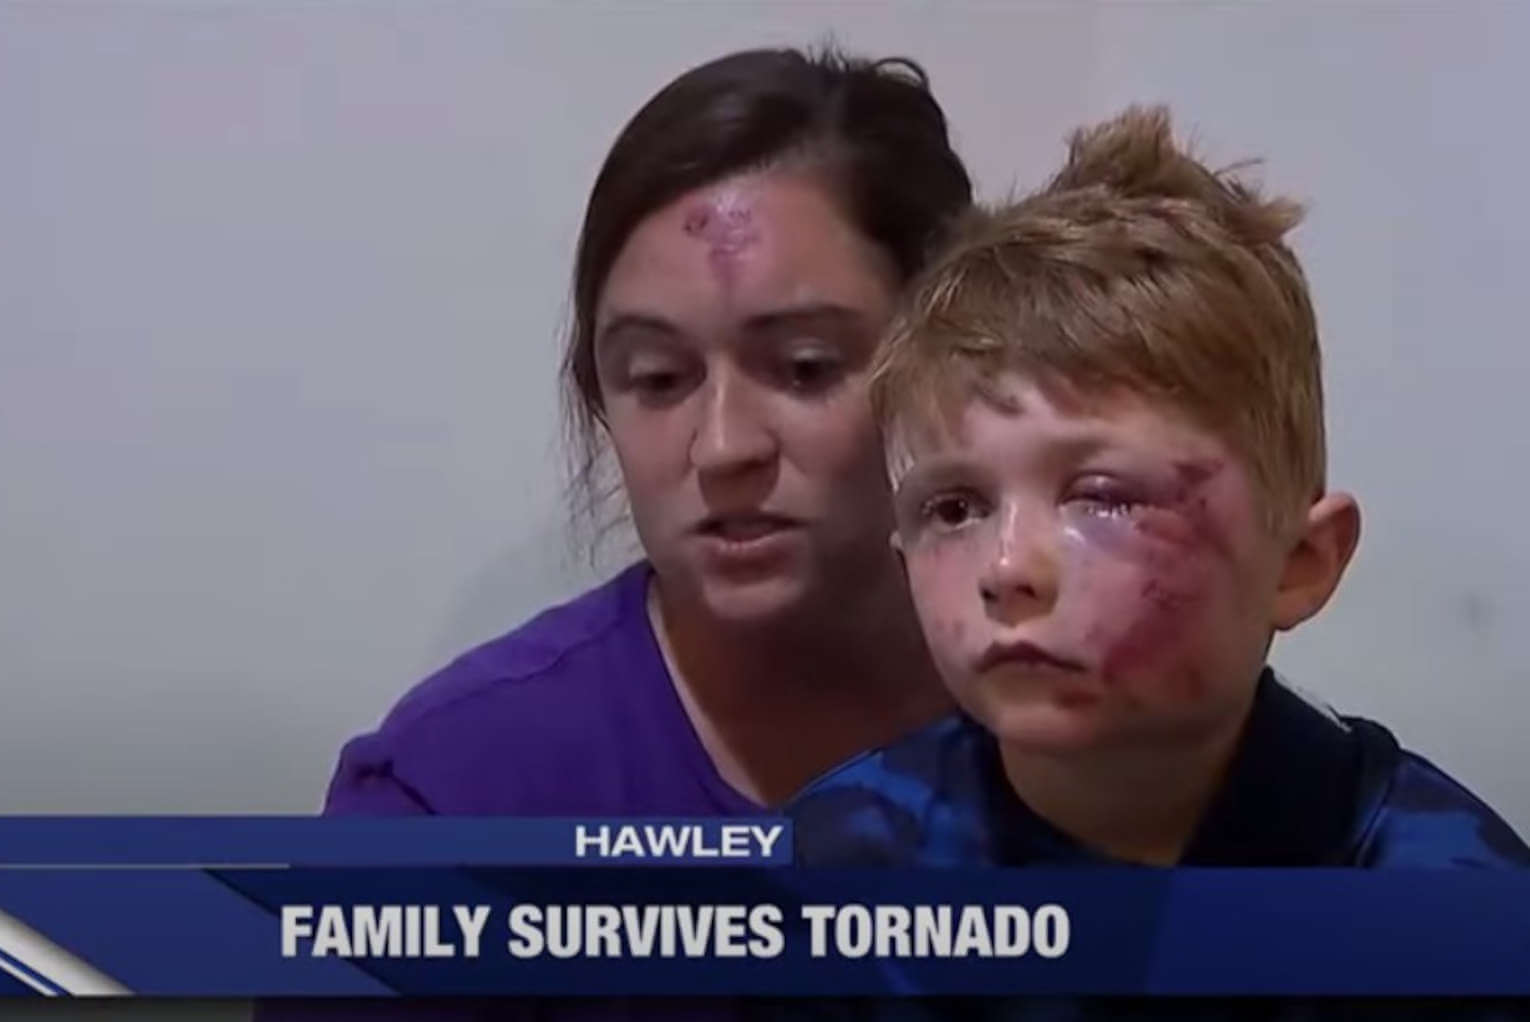 Texas Boy Survives Tornado’s Grip in Remarkable Miracle